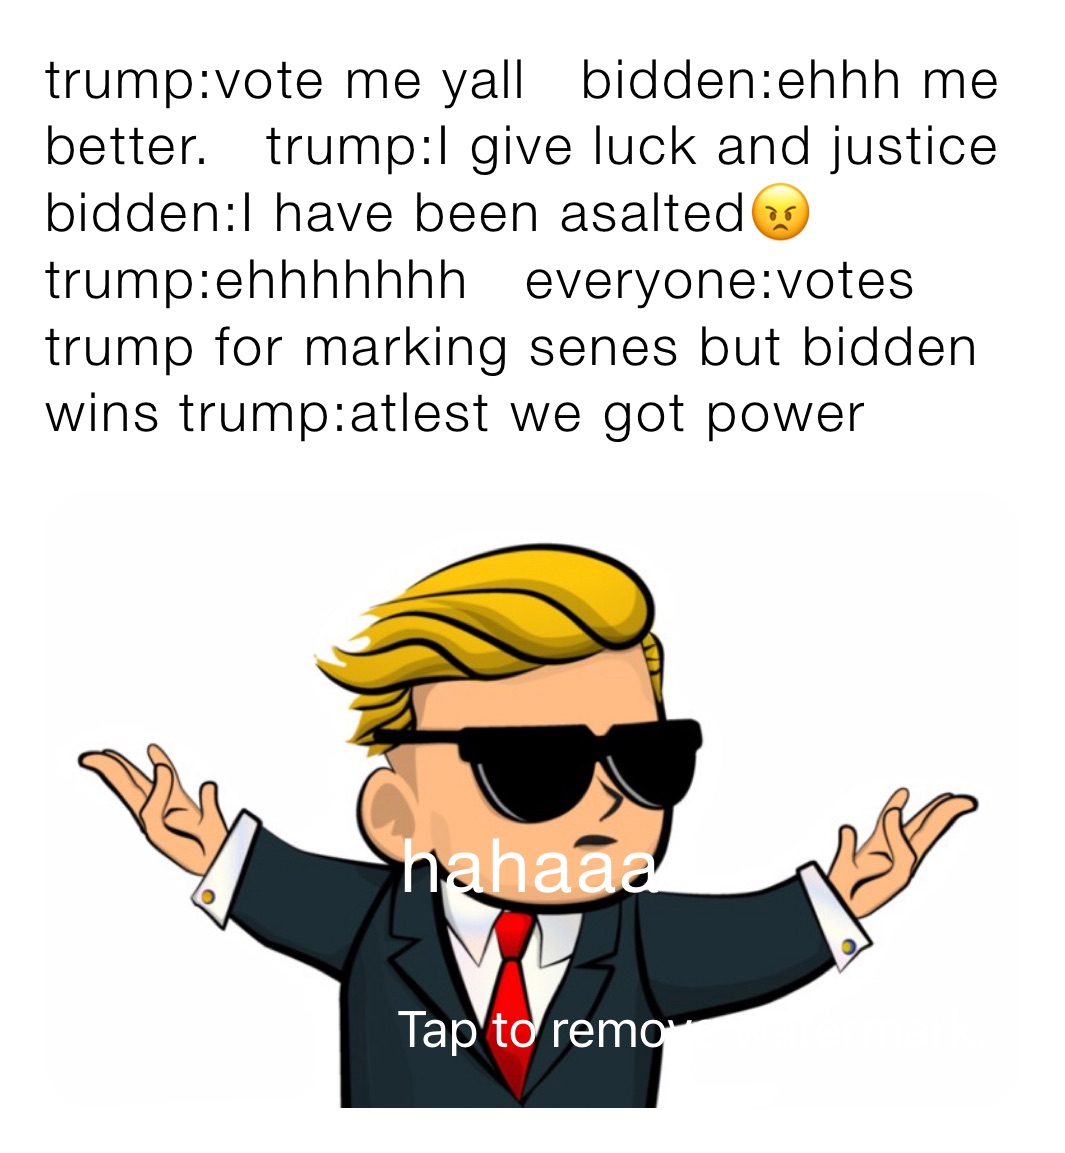 trump:vote me yall   bidden:ehhh me better.   trump:I give luck and justice   bidden:I have been asalted😠 trump:ehhhhhhh   everyone:votes trump for marking senes but bidden wins trump:atlest we got power